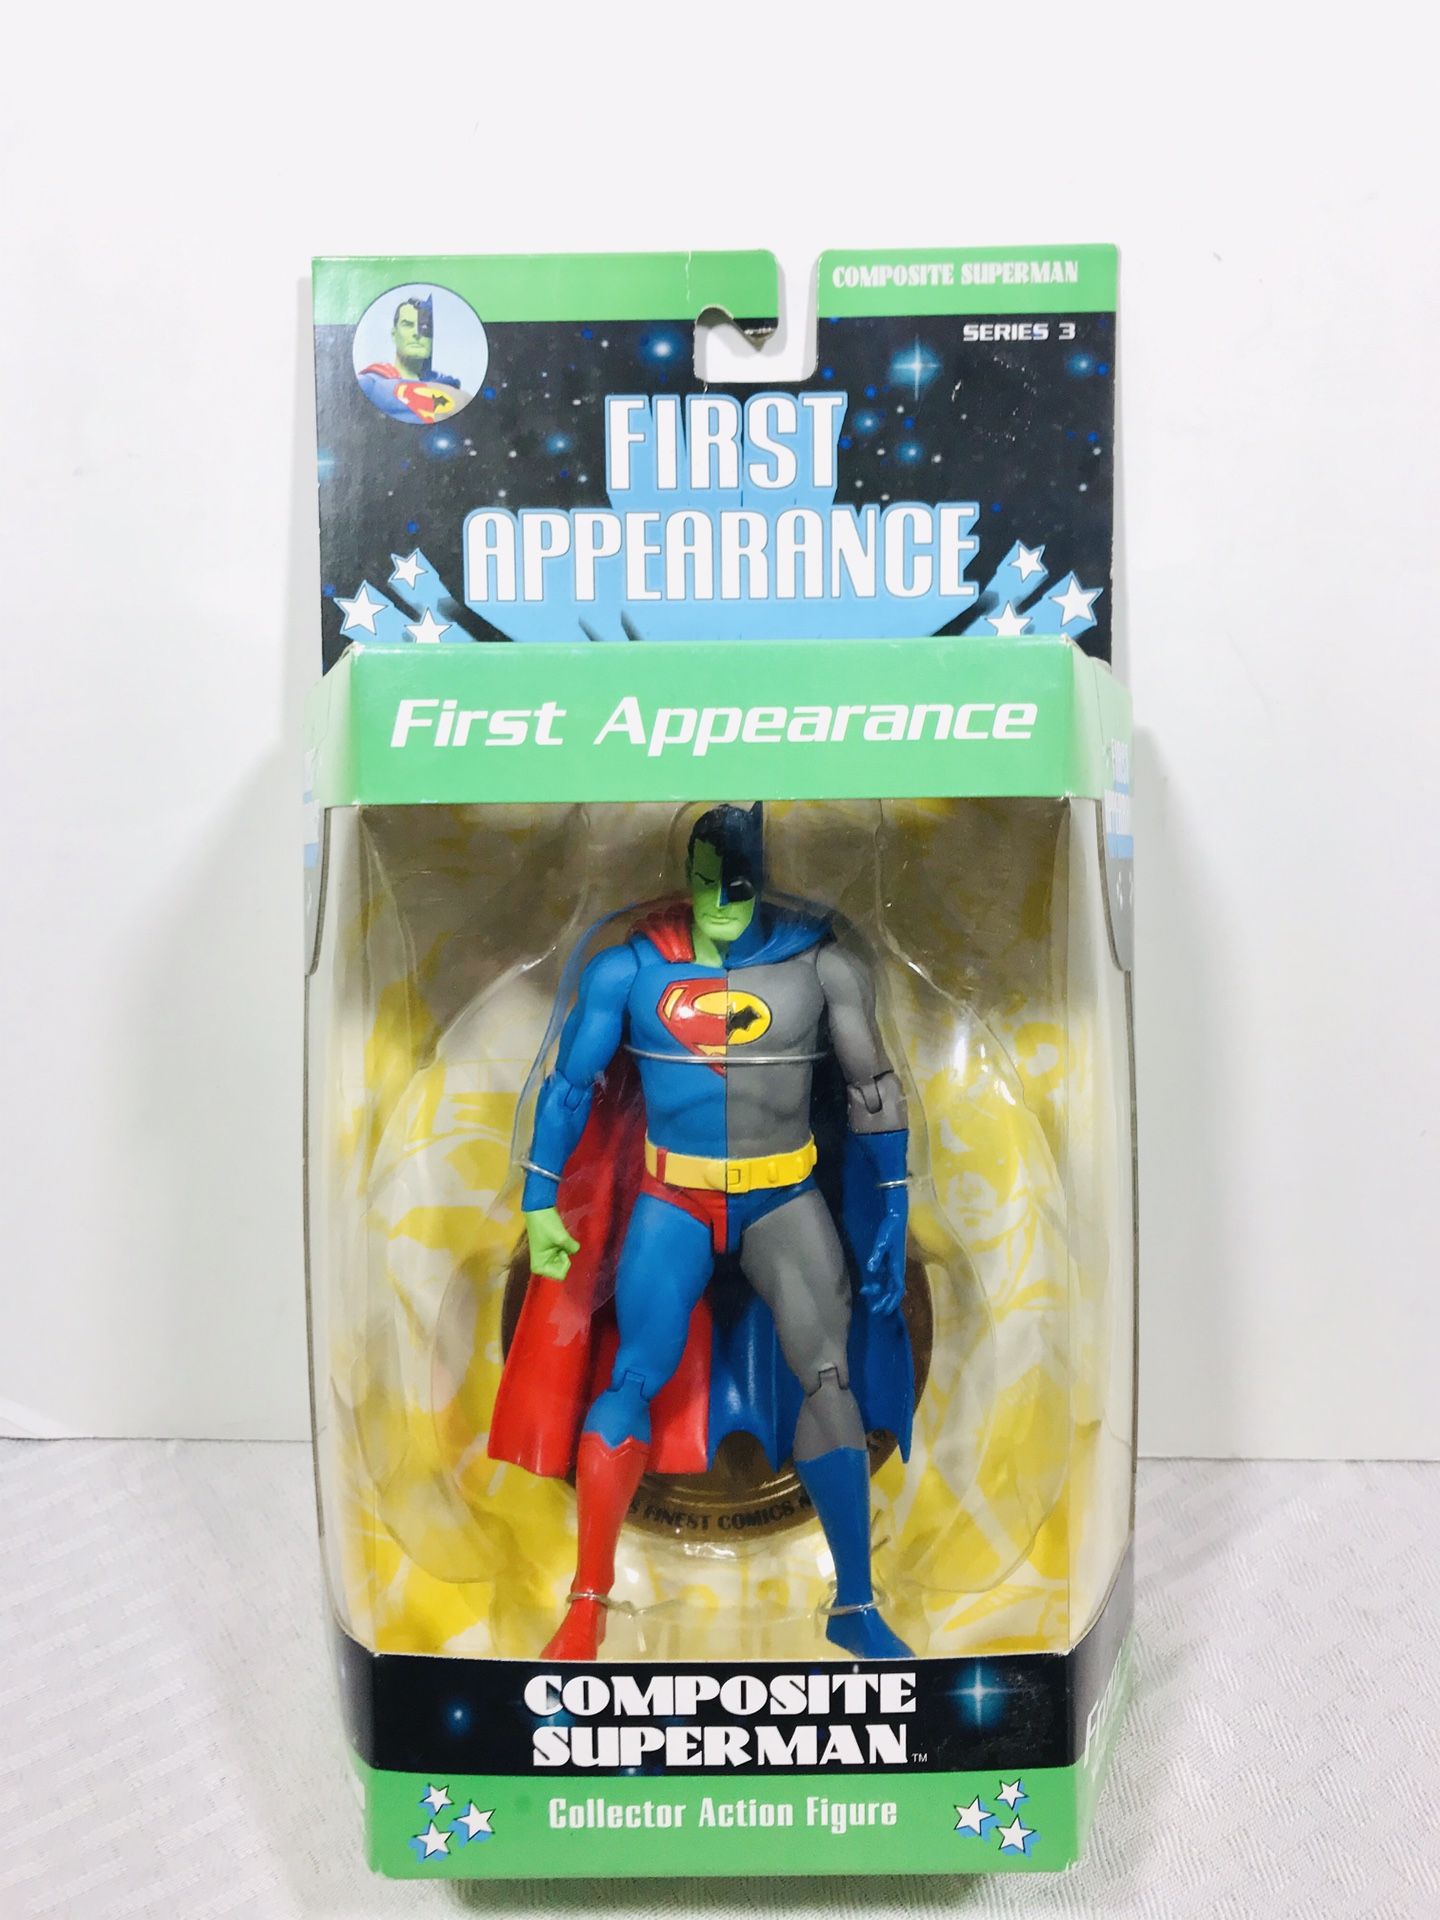 First Appearance Composite Superman Action Figure